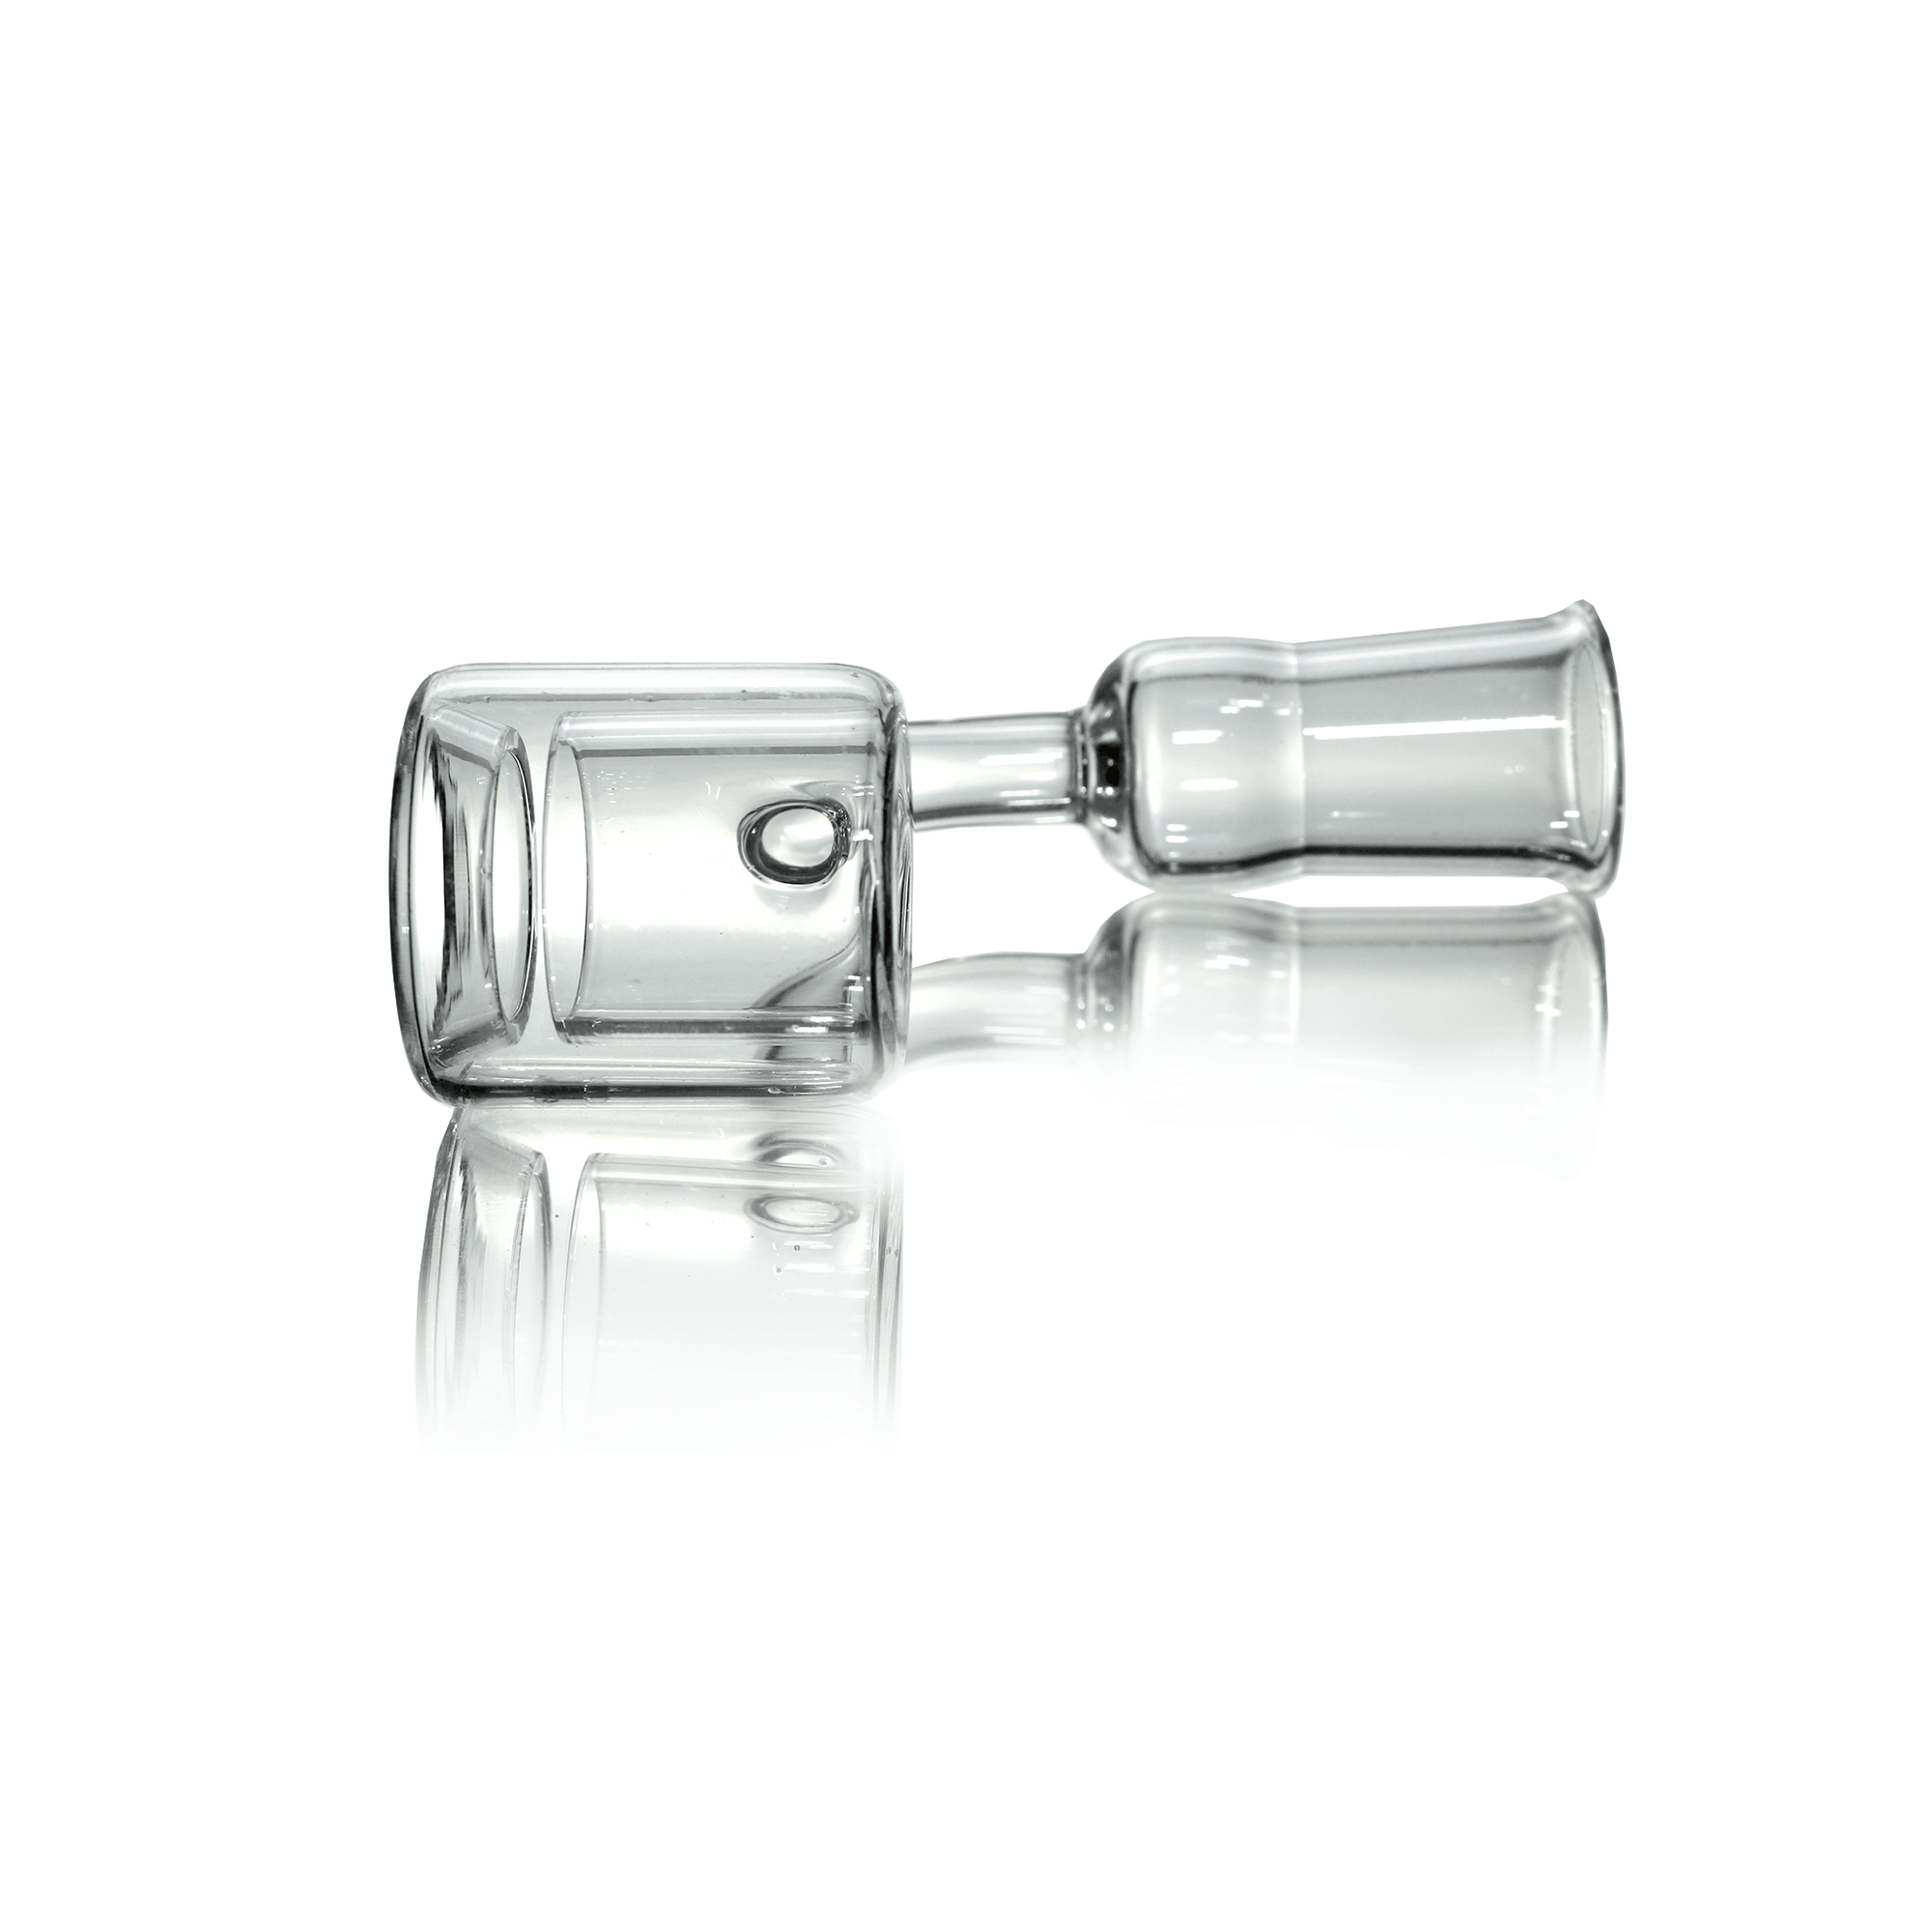 Quartz Double Wall Banger (Torch) | 14mm Female | Prone View | the dabbing specialists